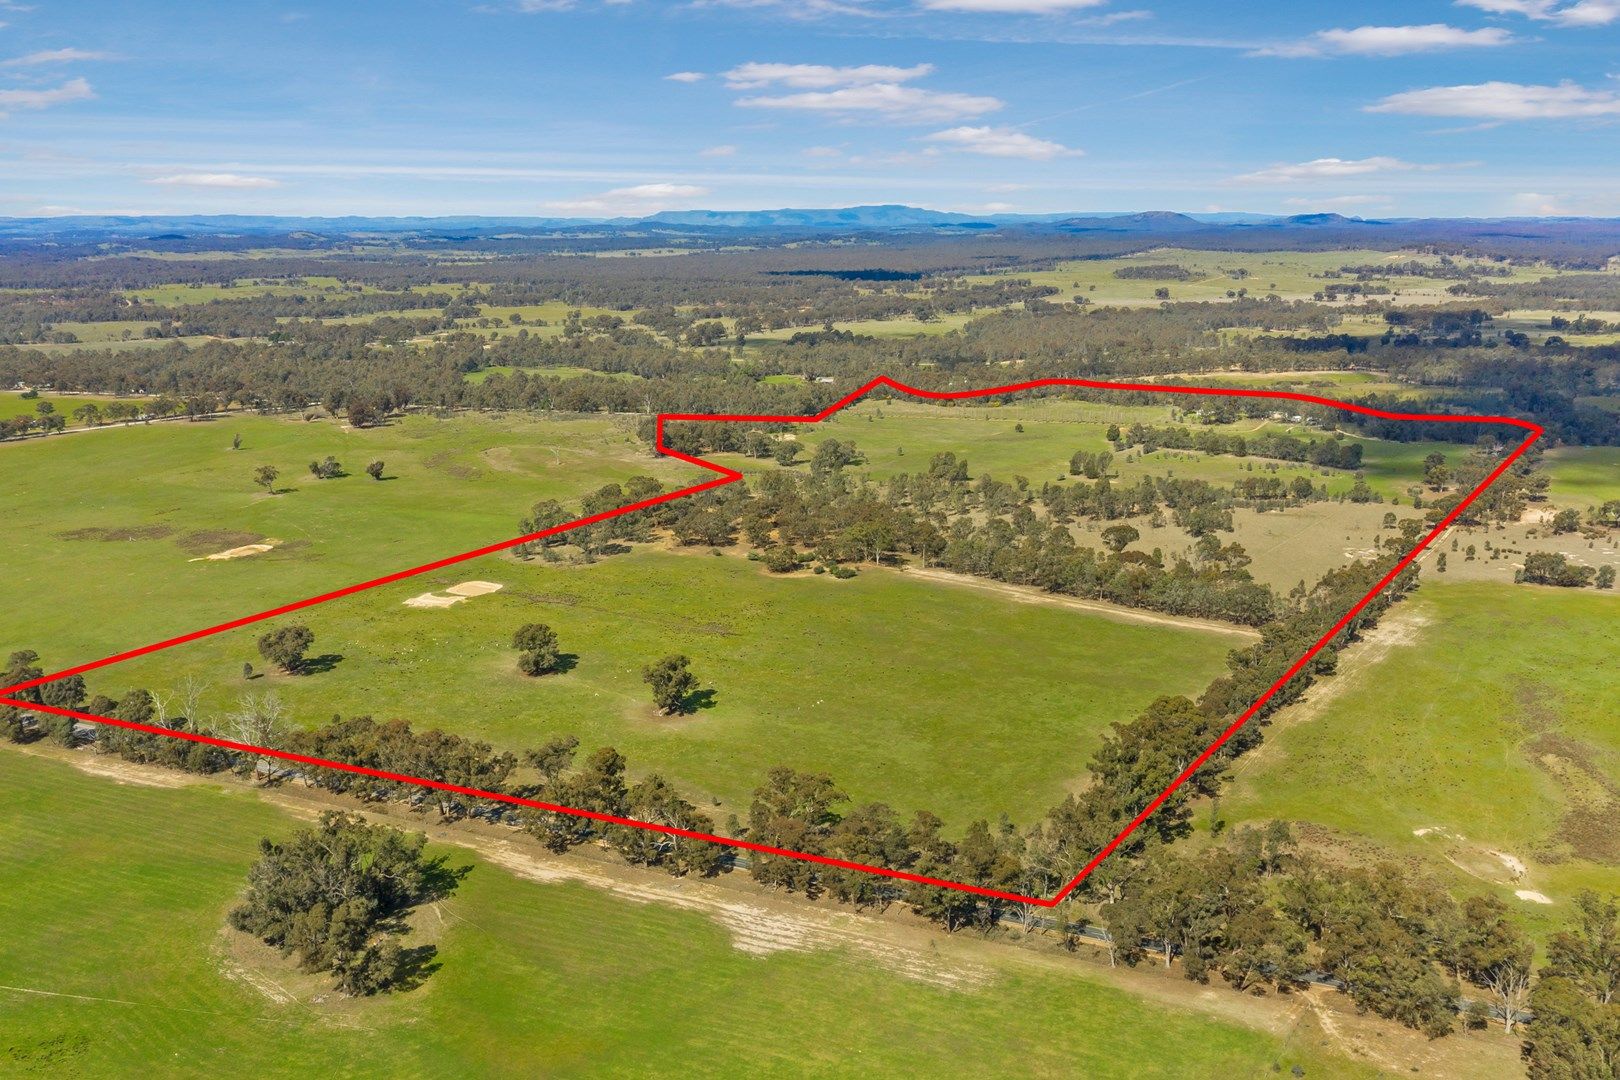 1149 South Costerfield - Graytown Road, Nagambie VIC 3608, Image 0